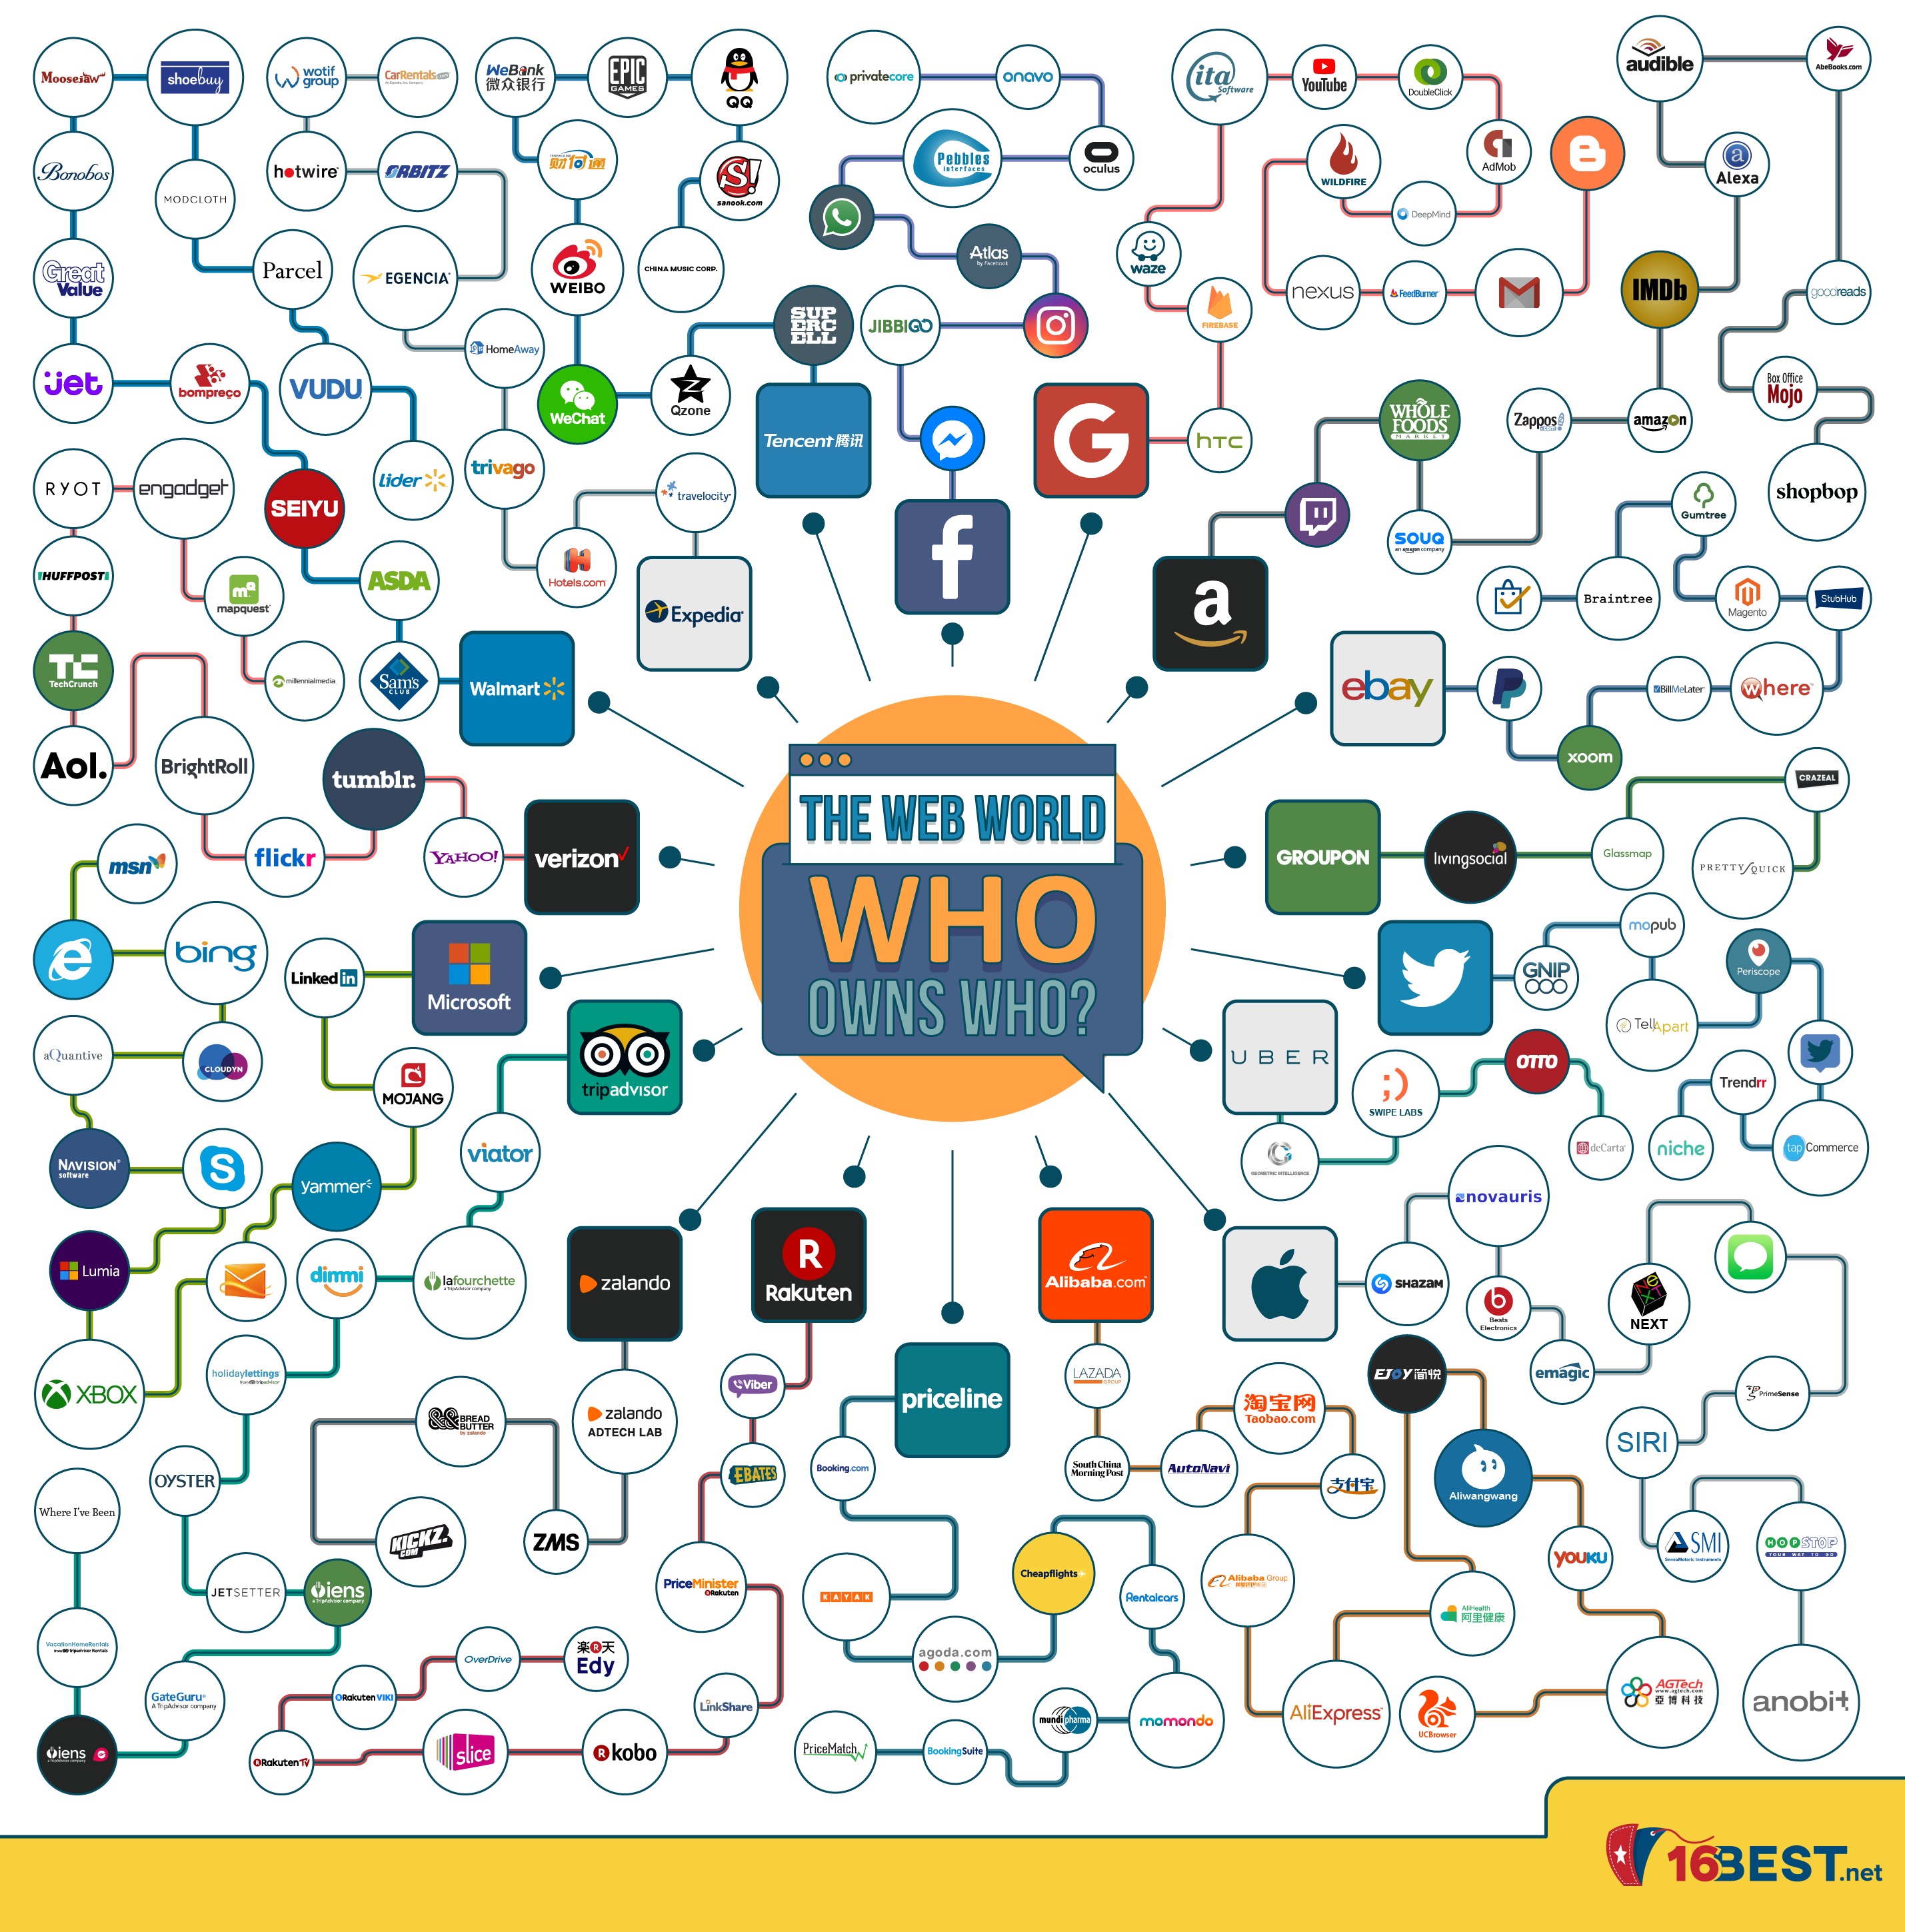 Who Owns Who on the Internet?